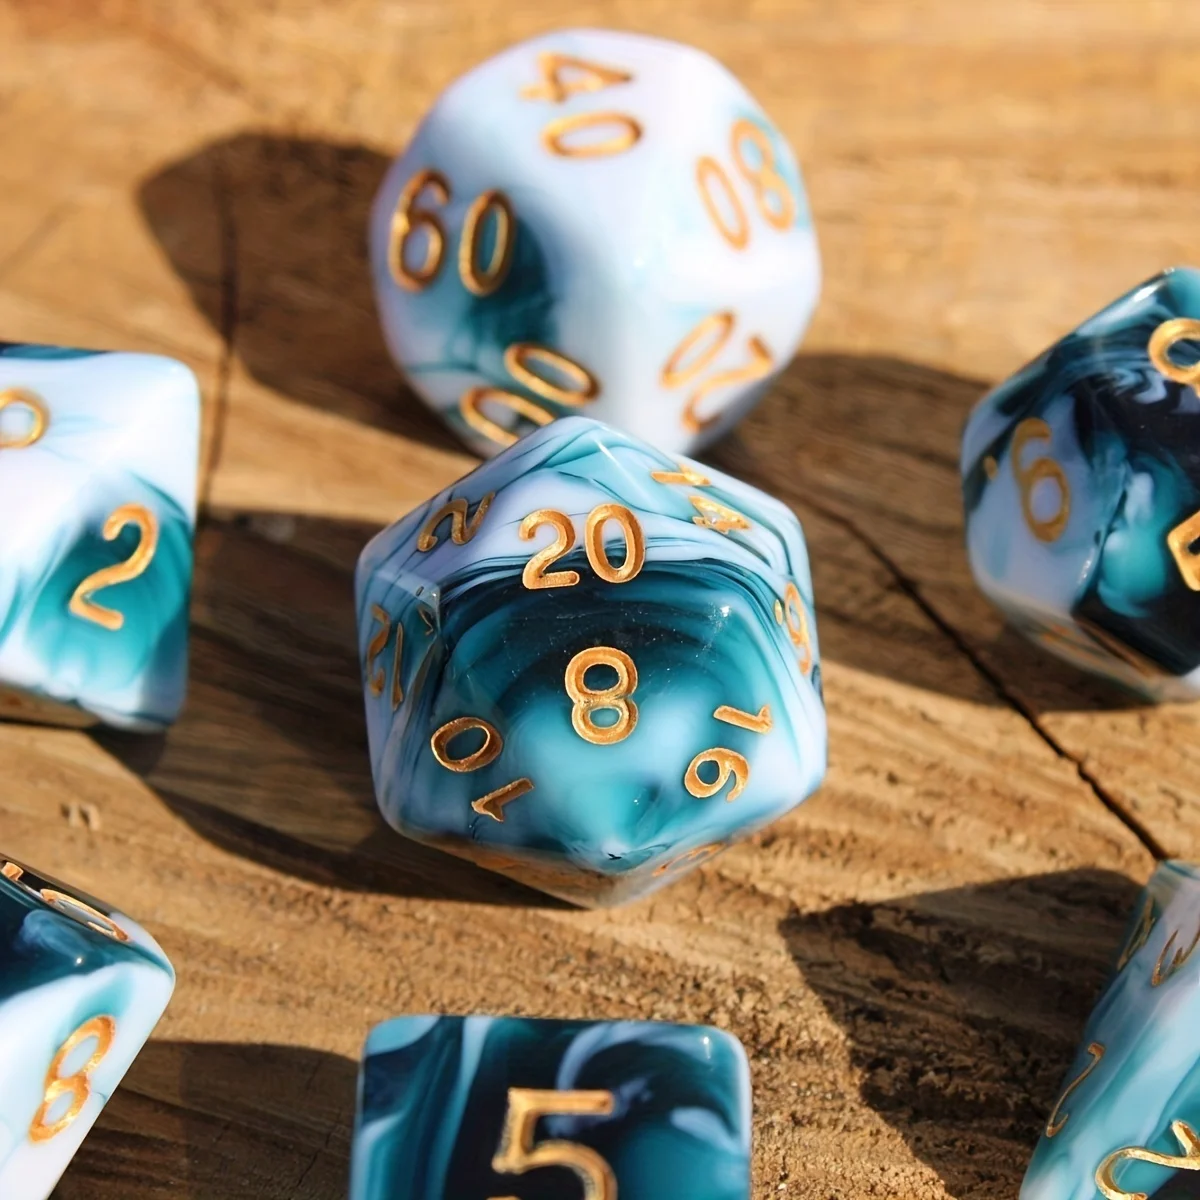 7Pcs/Set Blueberry Marble Dice for DND Dungeons and Dragons Table Games D&D RPG Tabletop Roleplaying dungeons